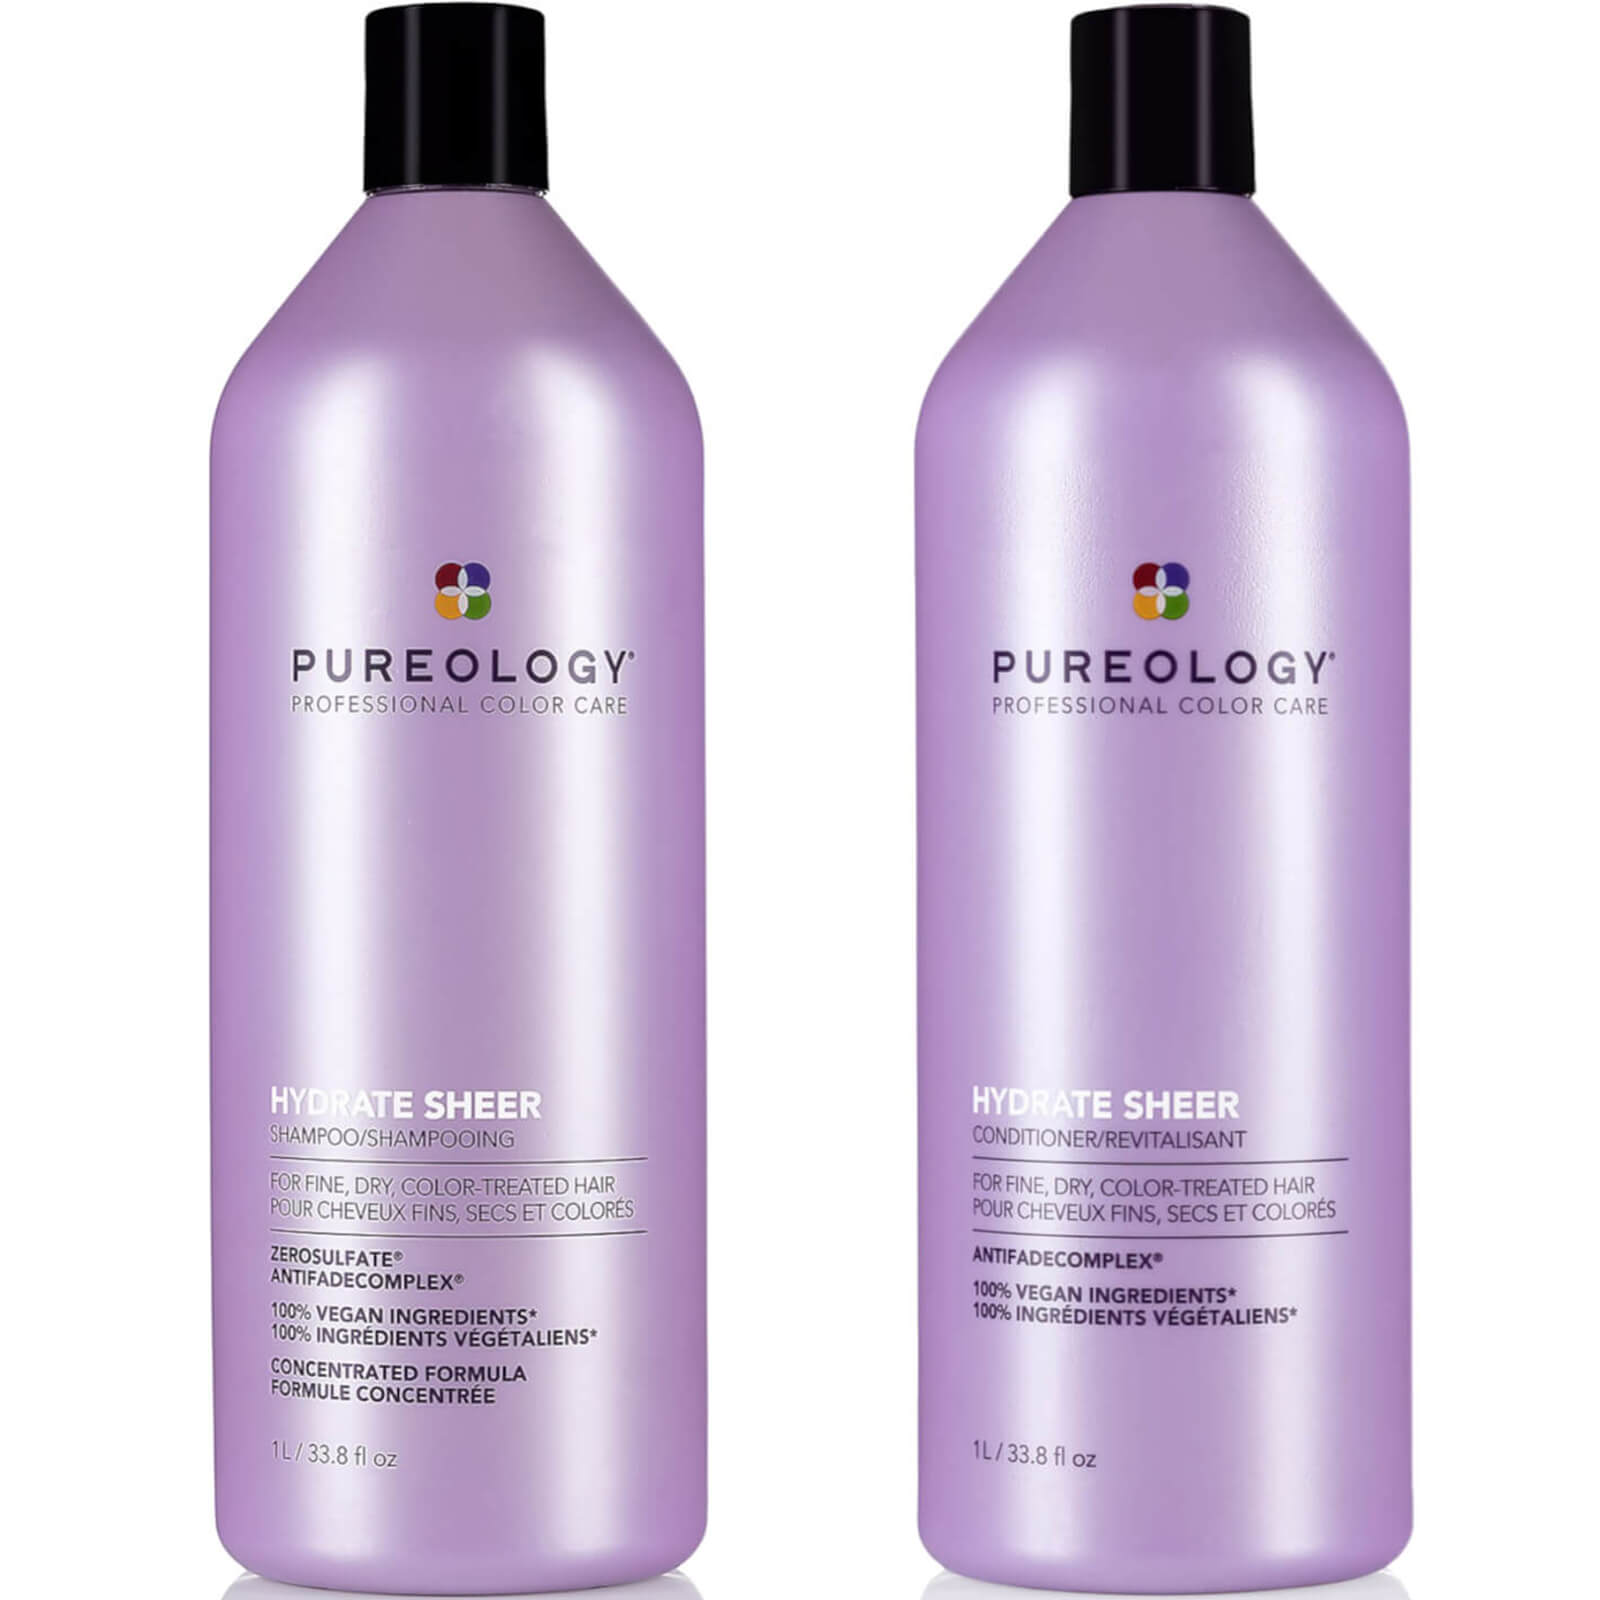 Pureology Hydrate Sheer Shampoo and Conditioner Supersize Bundle for Fine, Dry Hair, Sulphate Free f